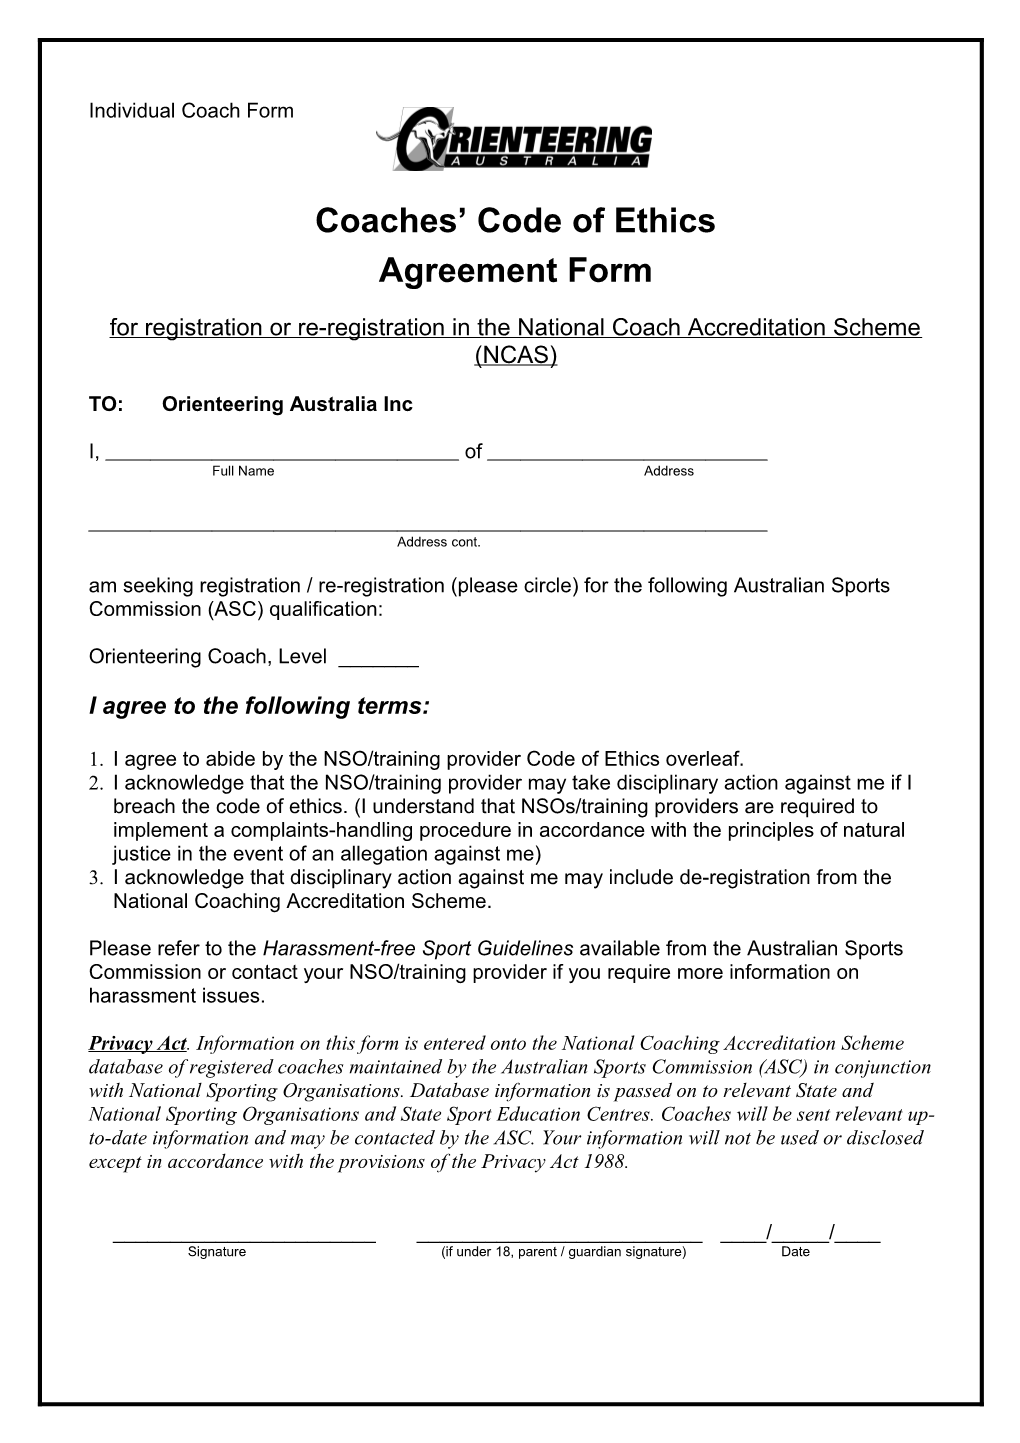 ACC Policy on the Coach S Code of Ethics Agreement